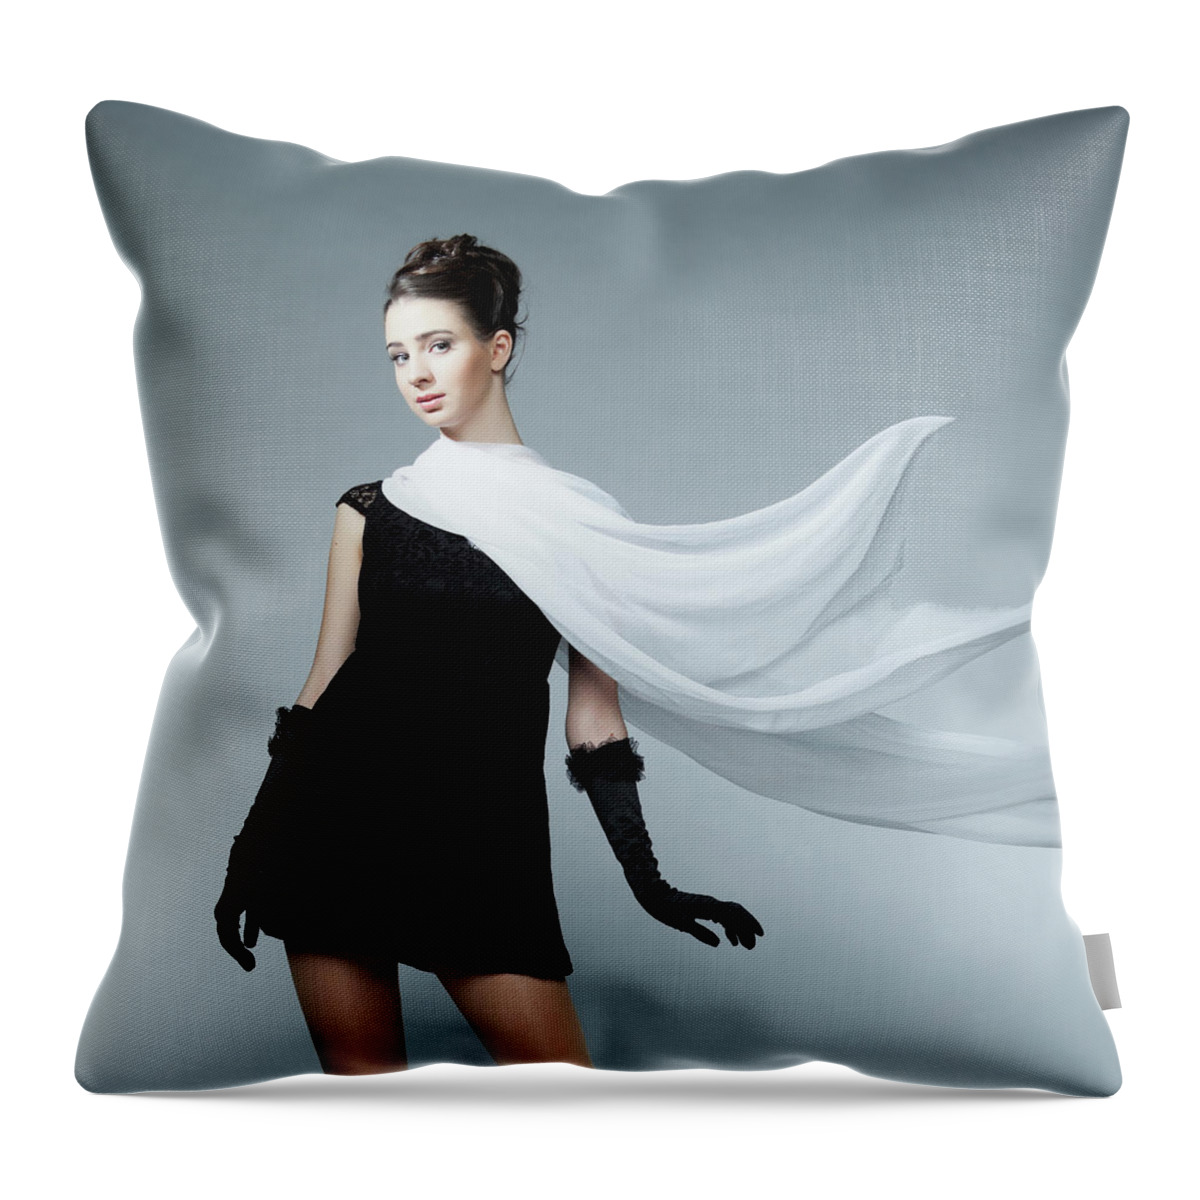 Cool Attitude Throw Pillow featuring the photograph Coquette by Ilia-art